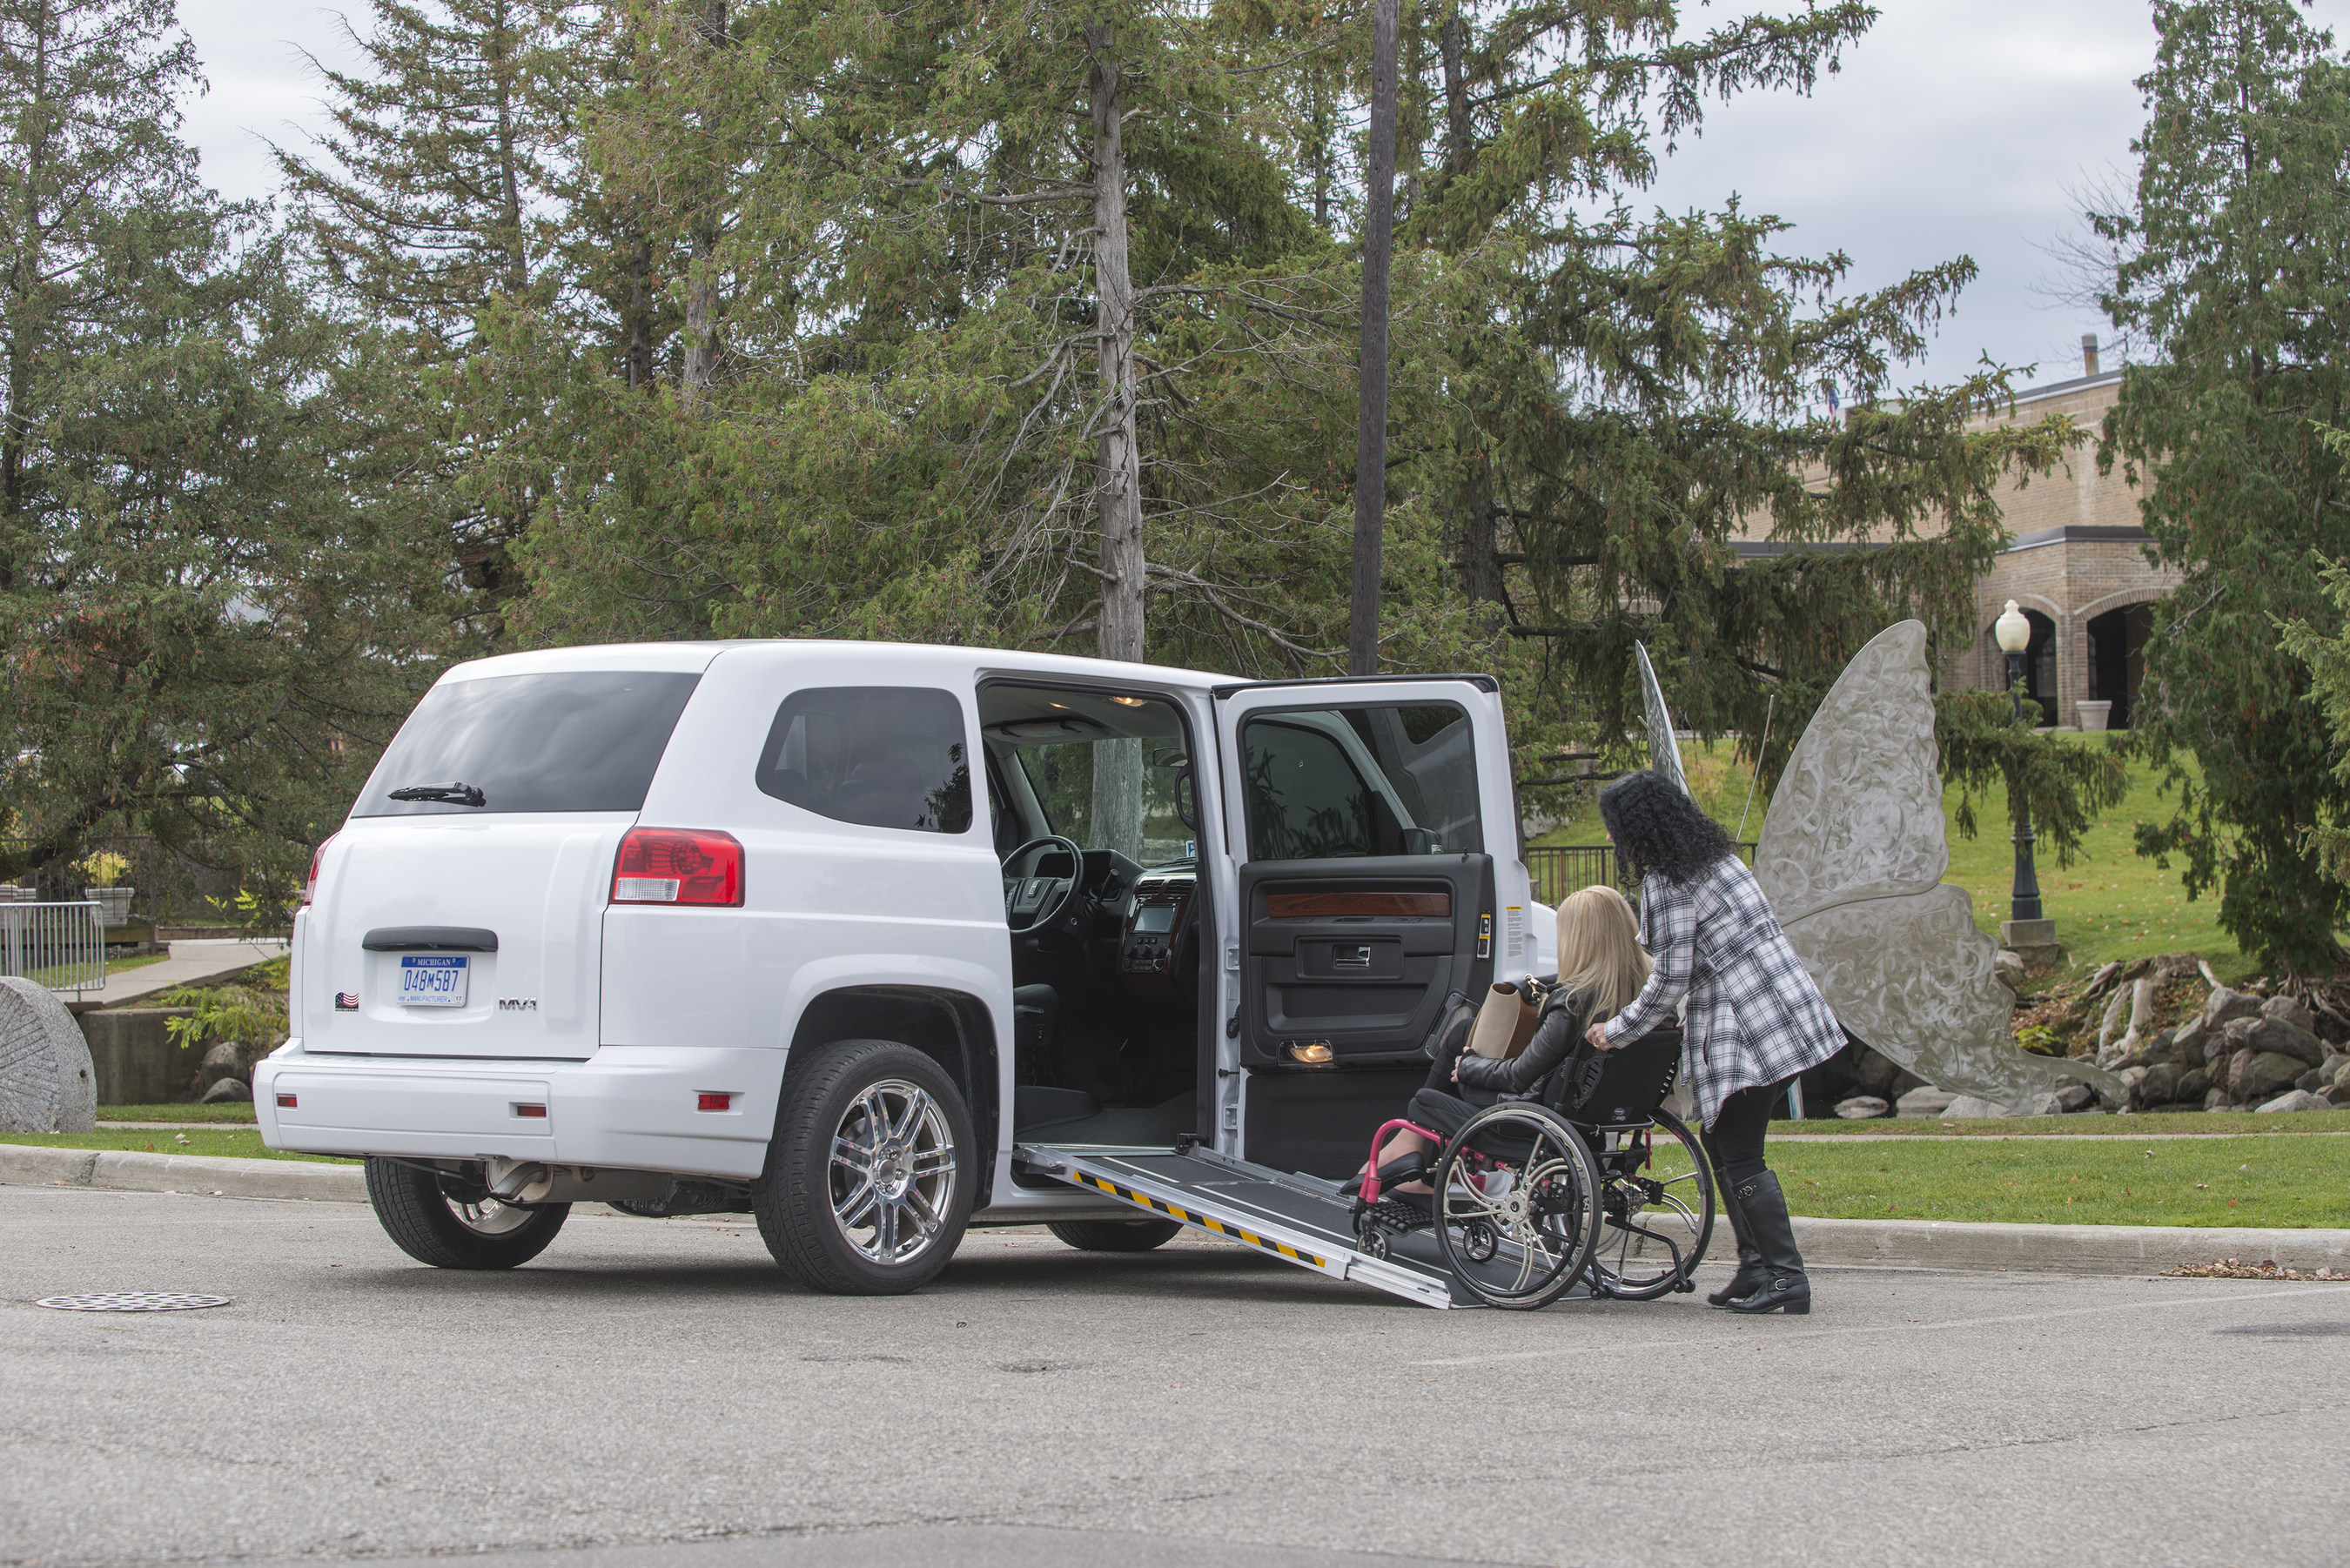 The MV-1 is the only vehicle built from the ground up for universal accessibility, offering wheelchair and scooter users safe and durable transportation.